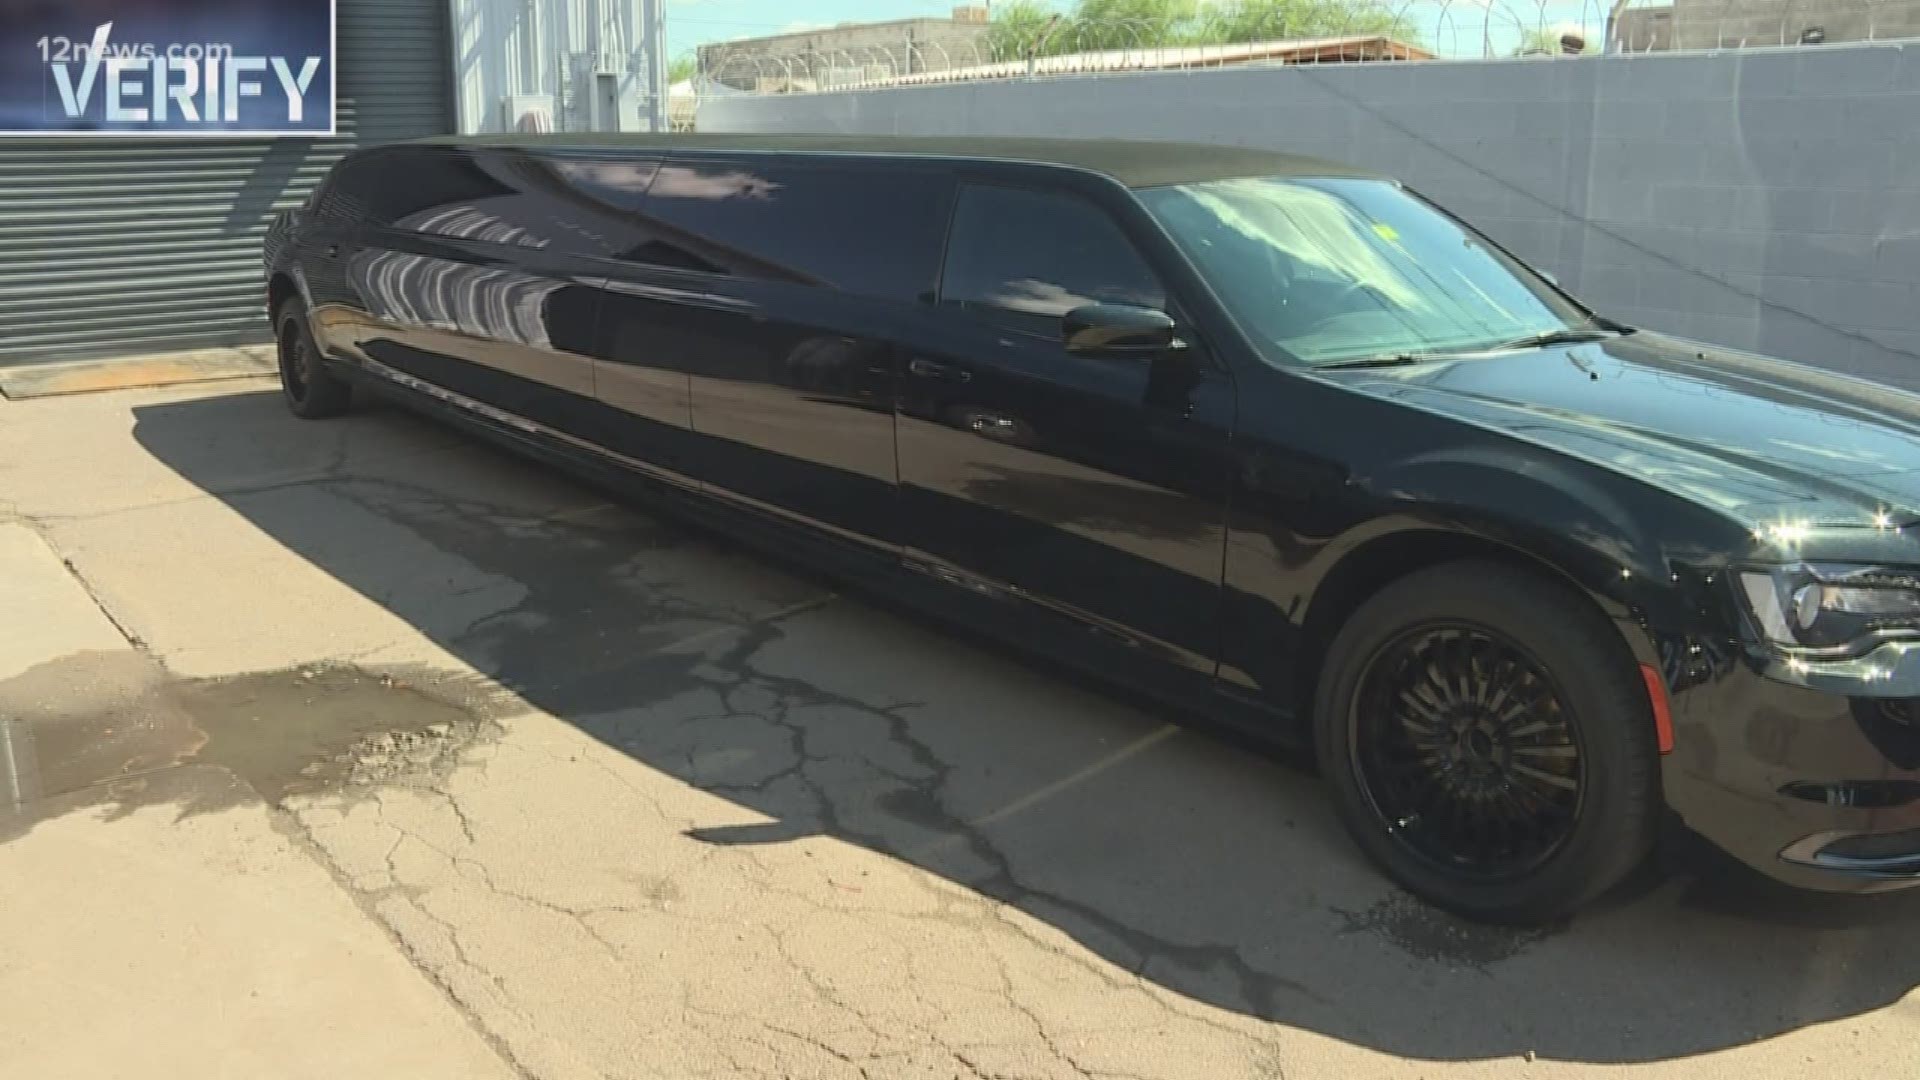 20 people died in a limousine in Upstate New York over the weekend. Just how safe are limos? We verify the regulations for limousines in Arizona.